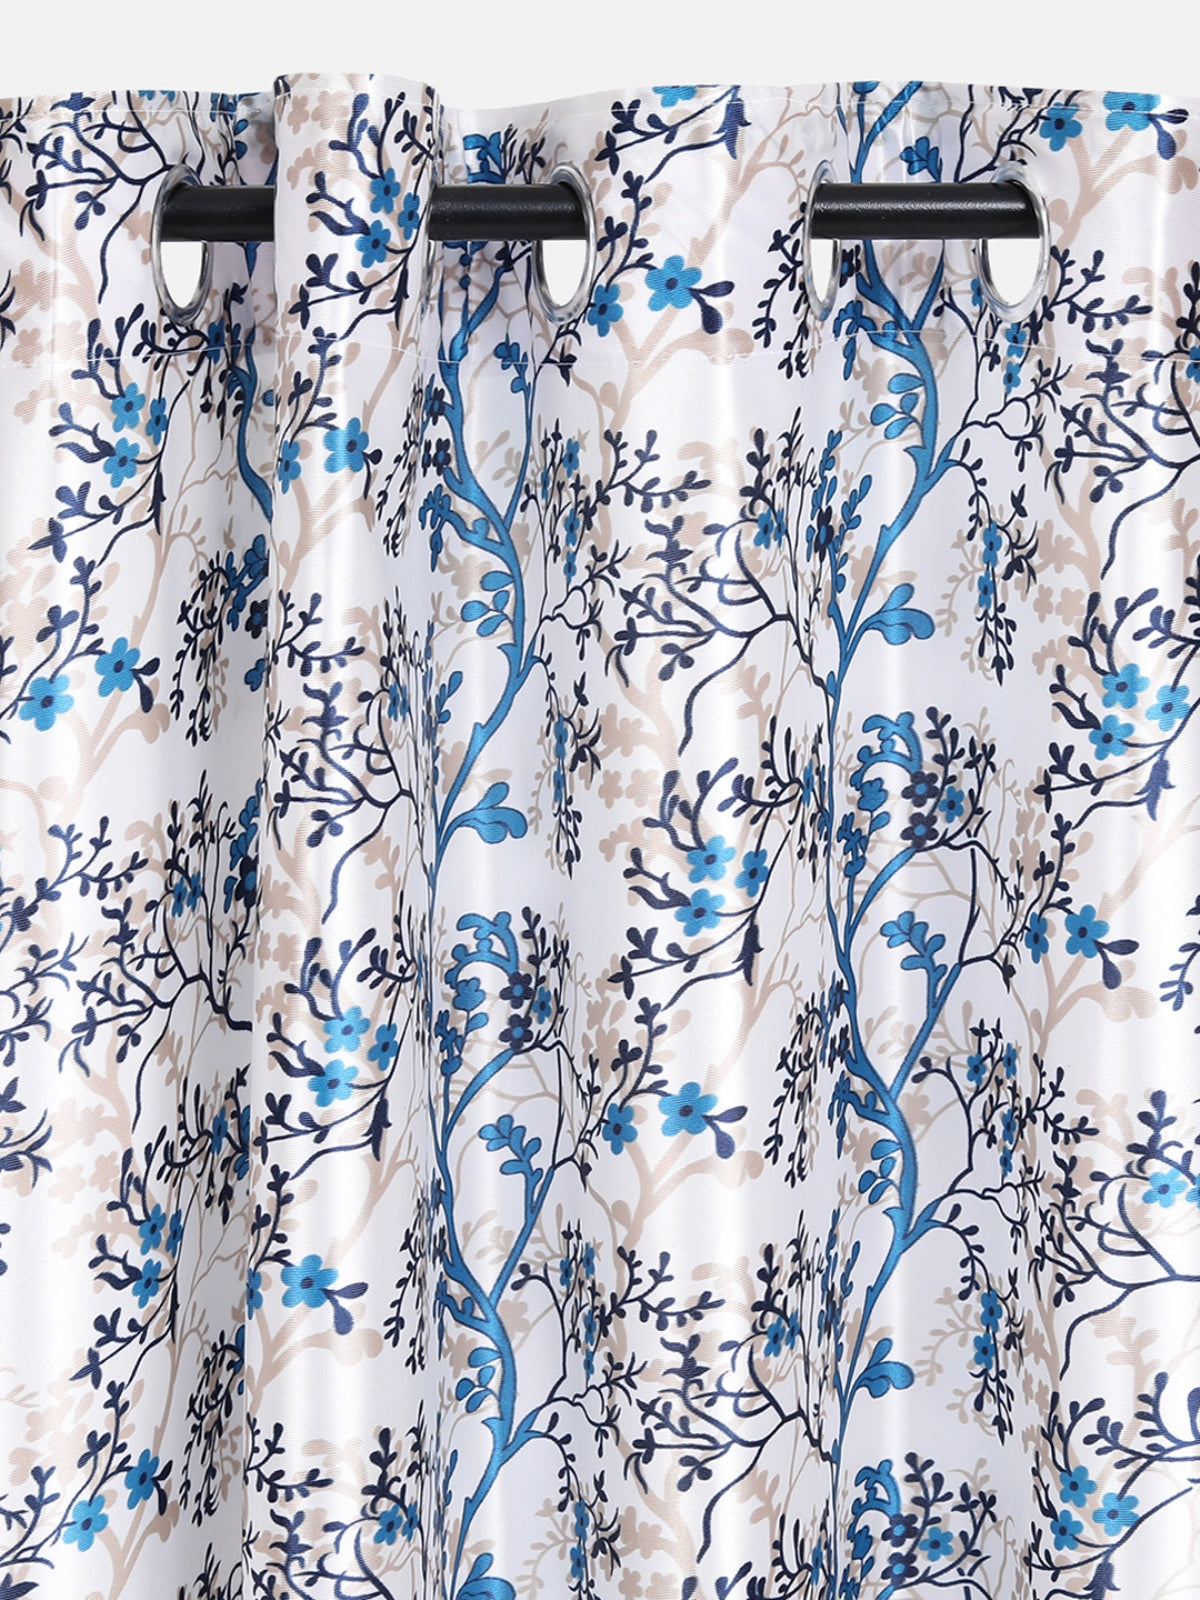 Romee Blue & White Floral Patterned Set of 2 Door Curtains